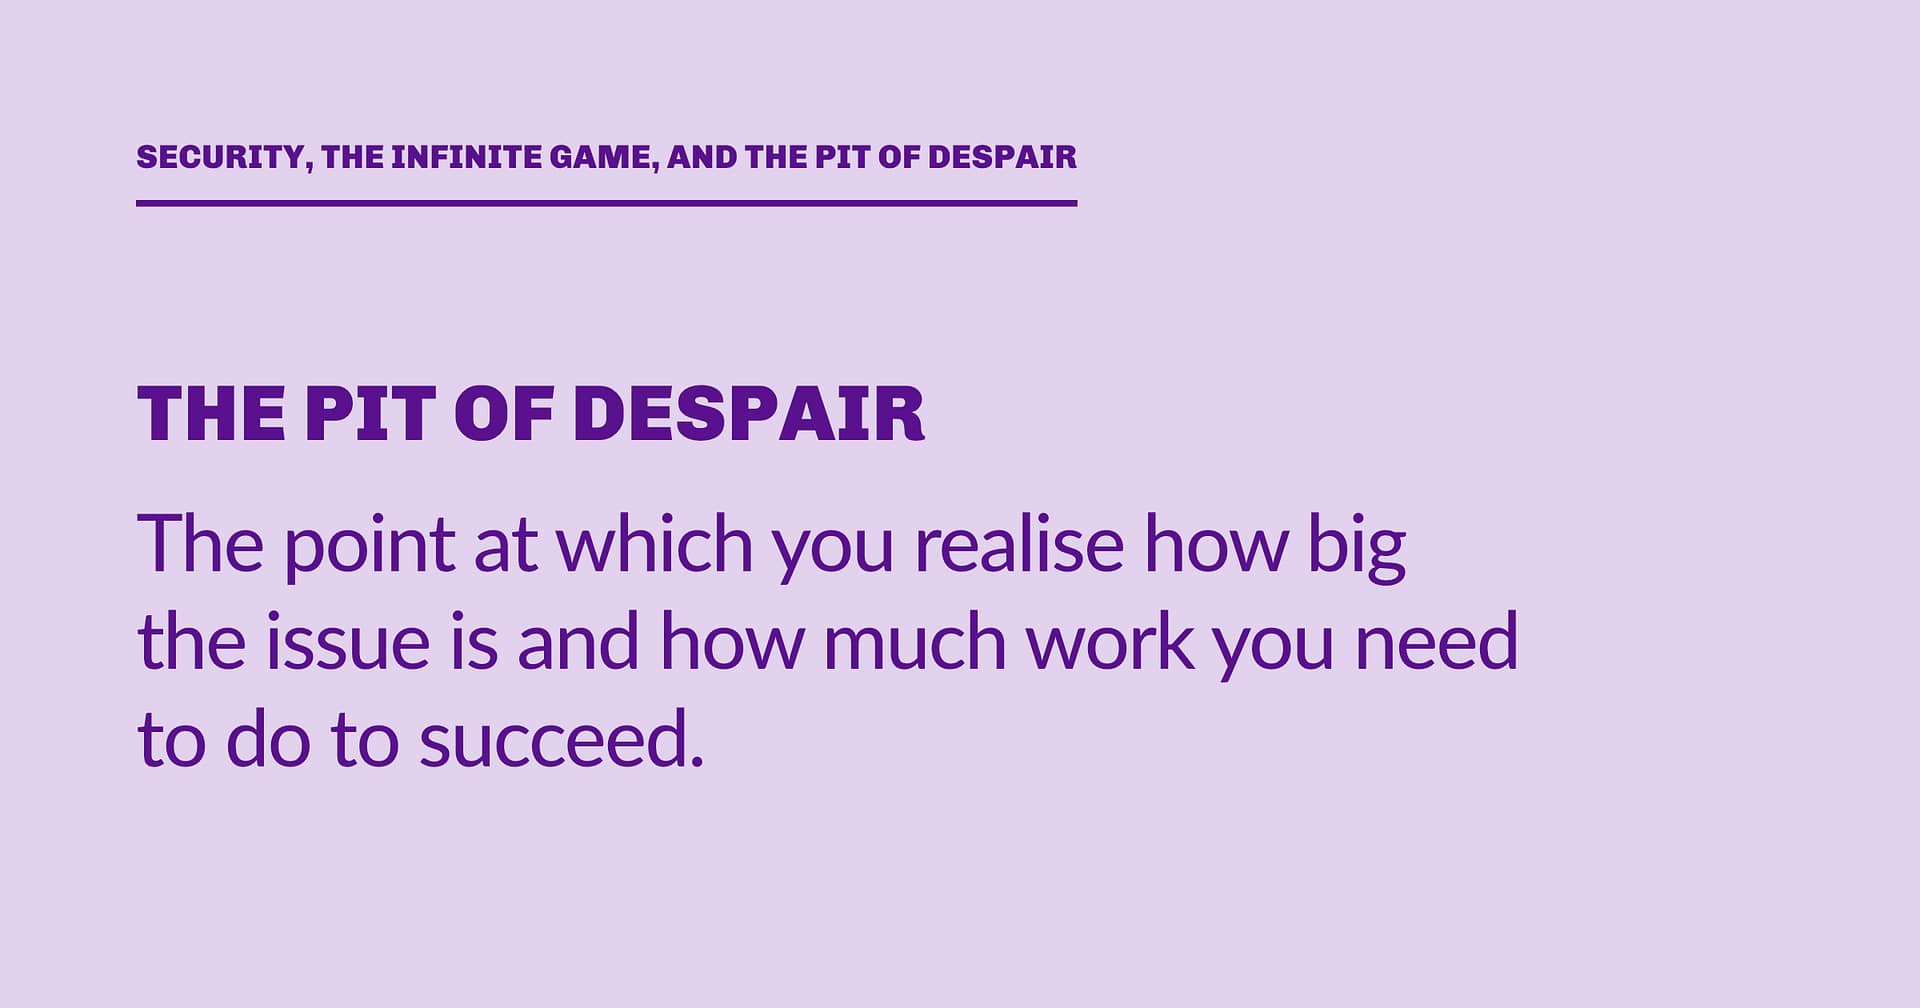 Highlight block: The pit of despair is the point at which you realise how big the issue is and how much work you need to do to succeed.